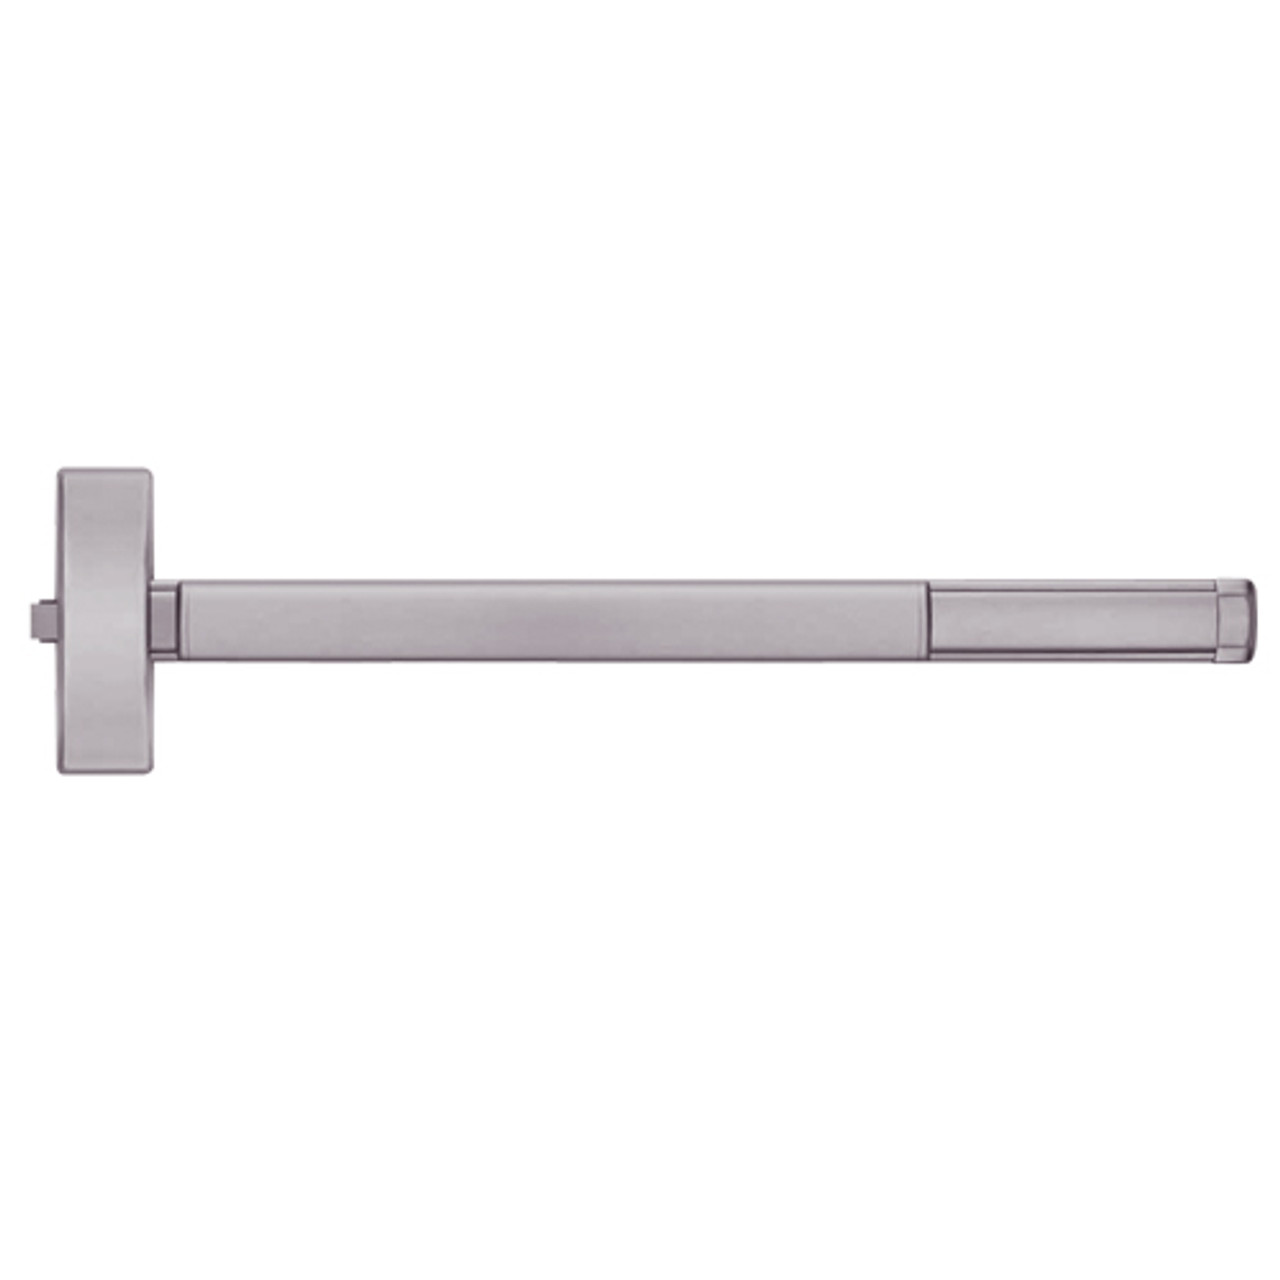 MLR2114-630-48 PHI 2100 Series Non Fire Rated Apex Rim Exit Device with Motorized Latch Retraction Prepped for Lever-Knob Always Active in Satin Stainless Steel Finish